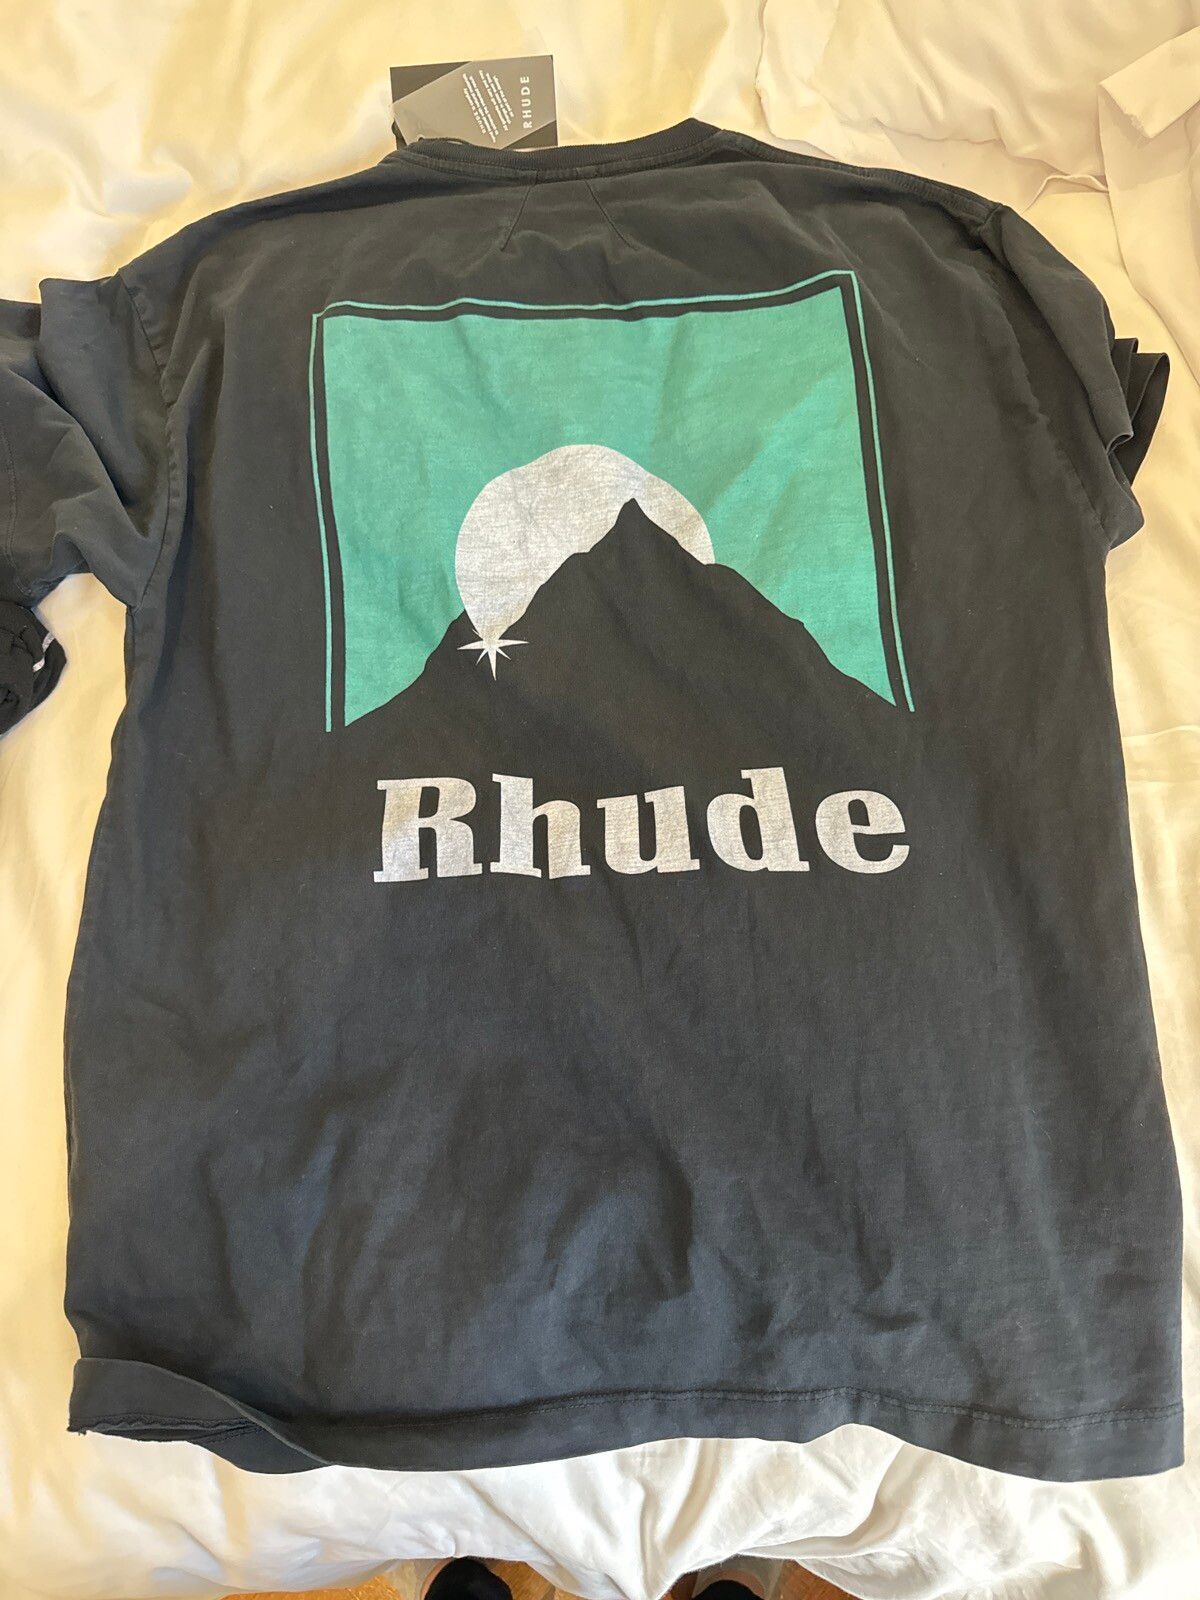 Pre-owned Rhude T-shirt Never Worn In Black